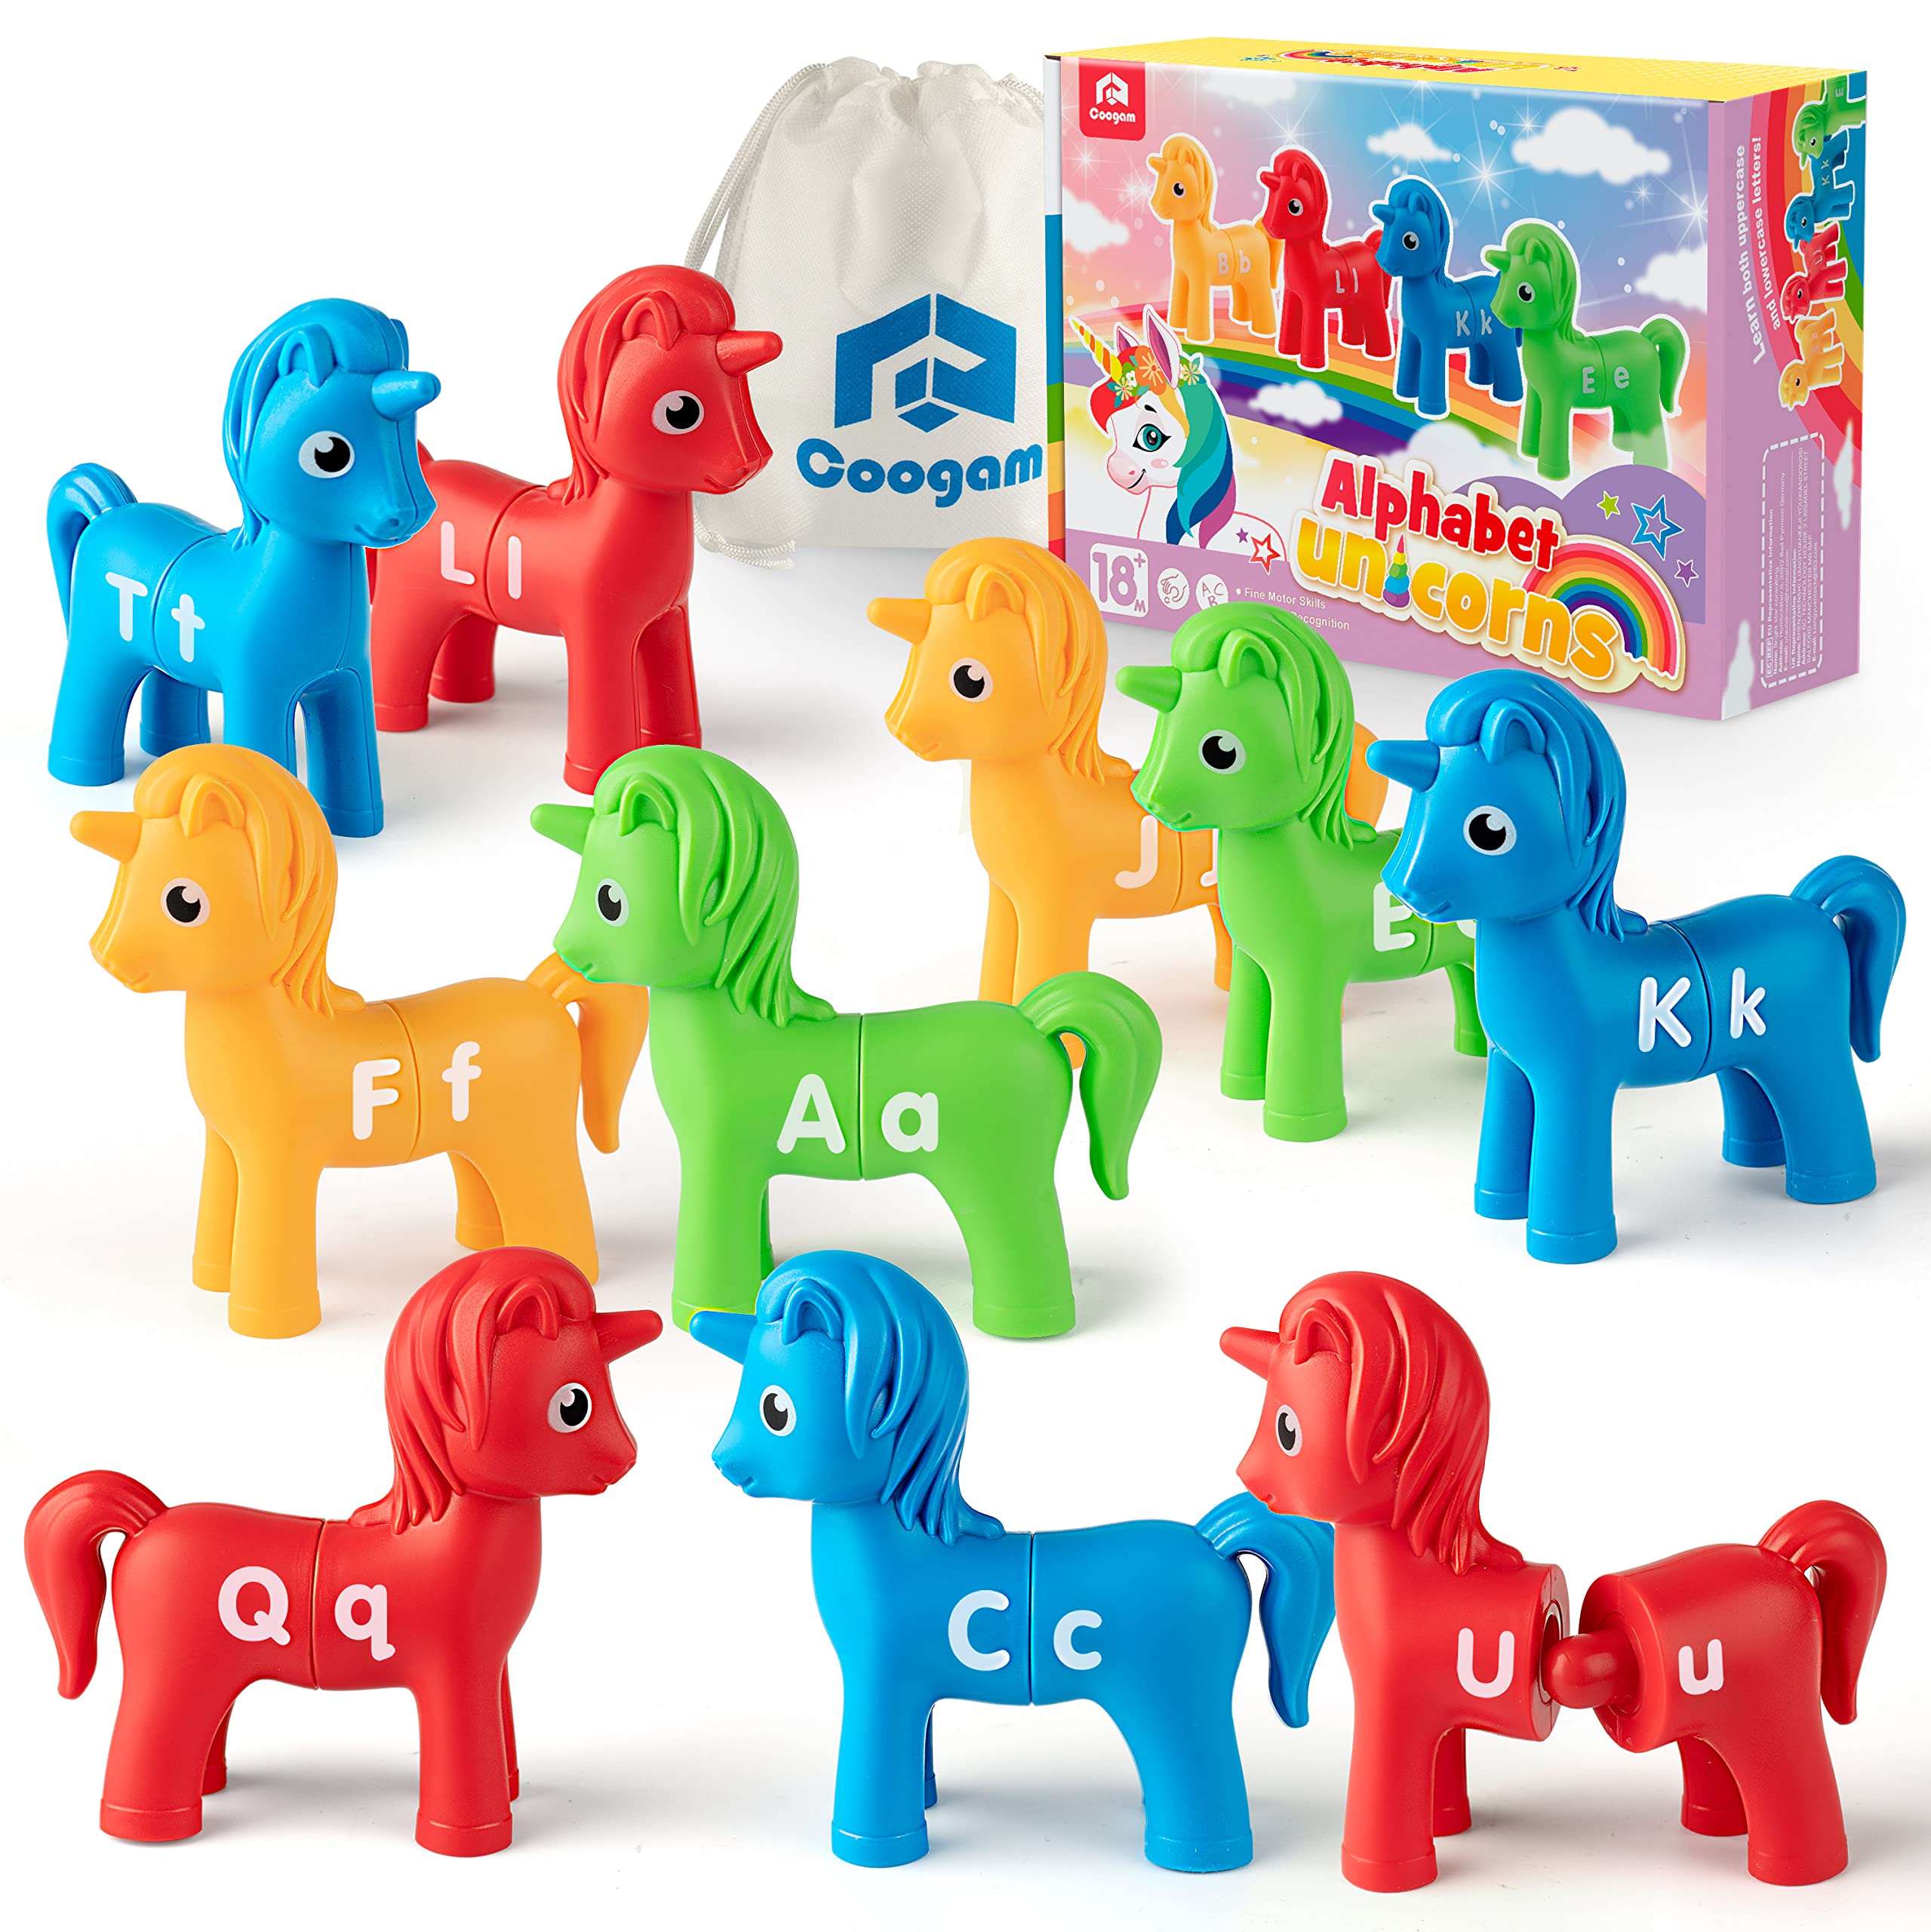 Coogam Unicorn Uppercase & Lowercase Letters Matching Game